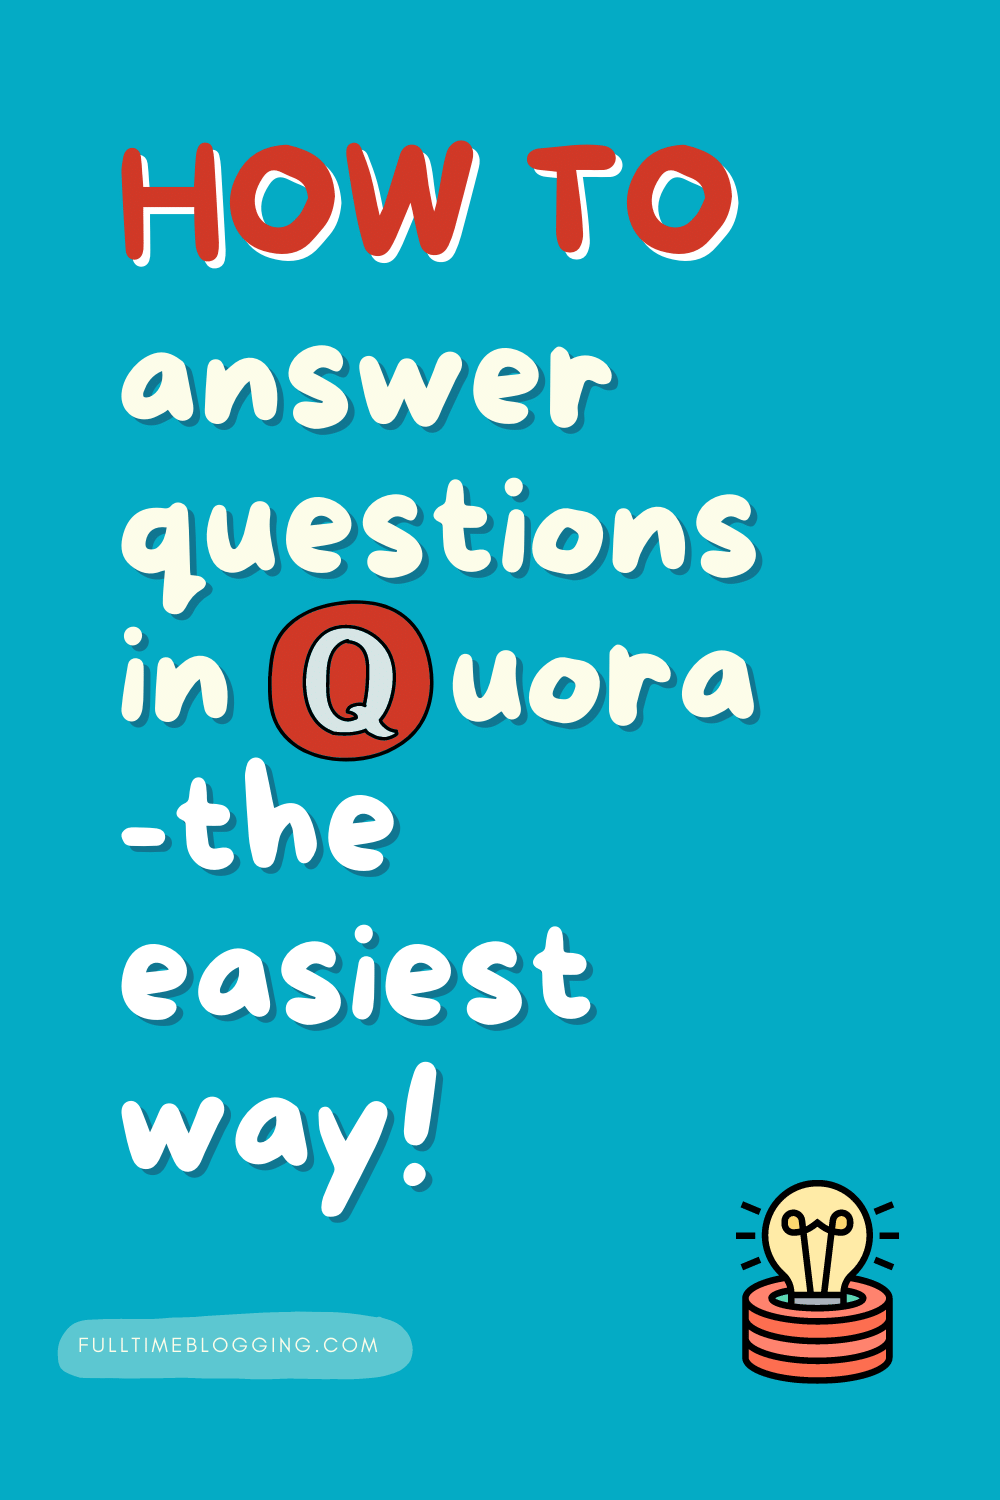 How To Answer The Questions In Quora